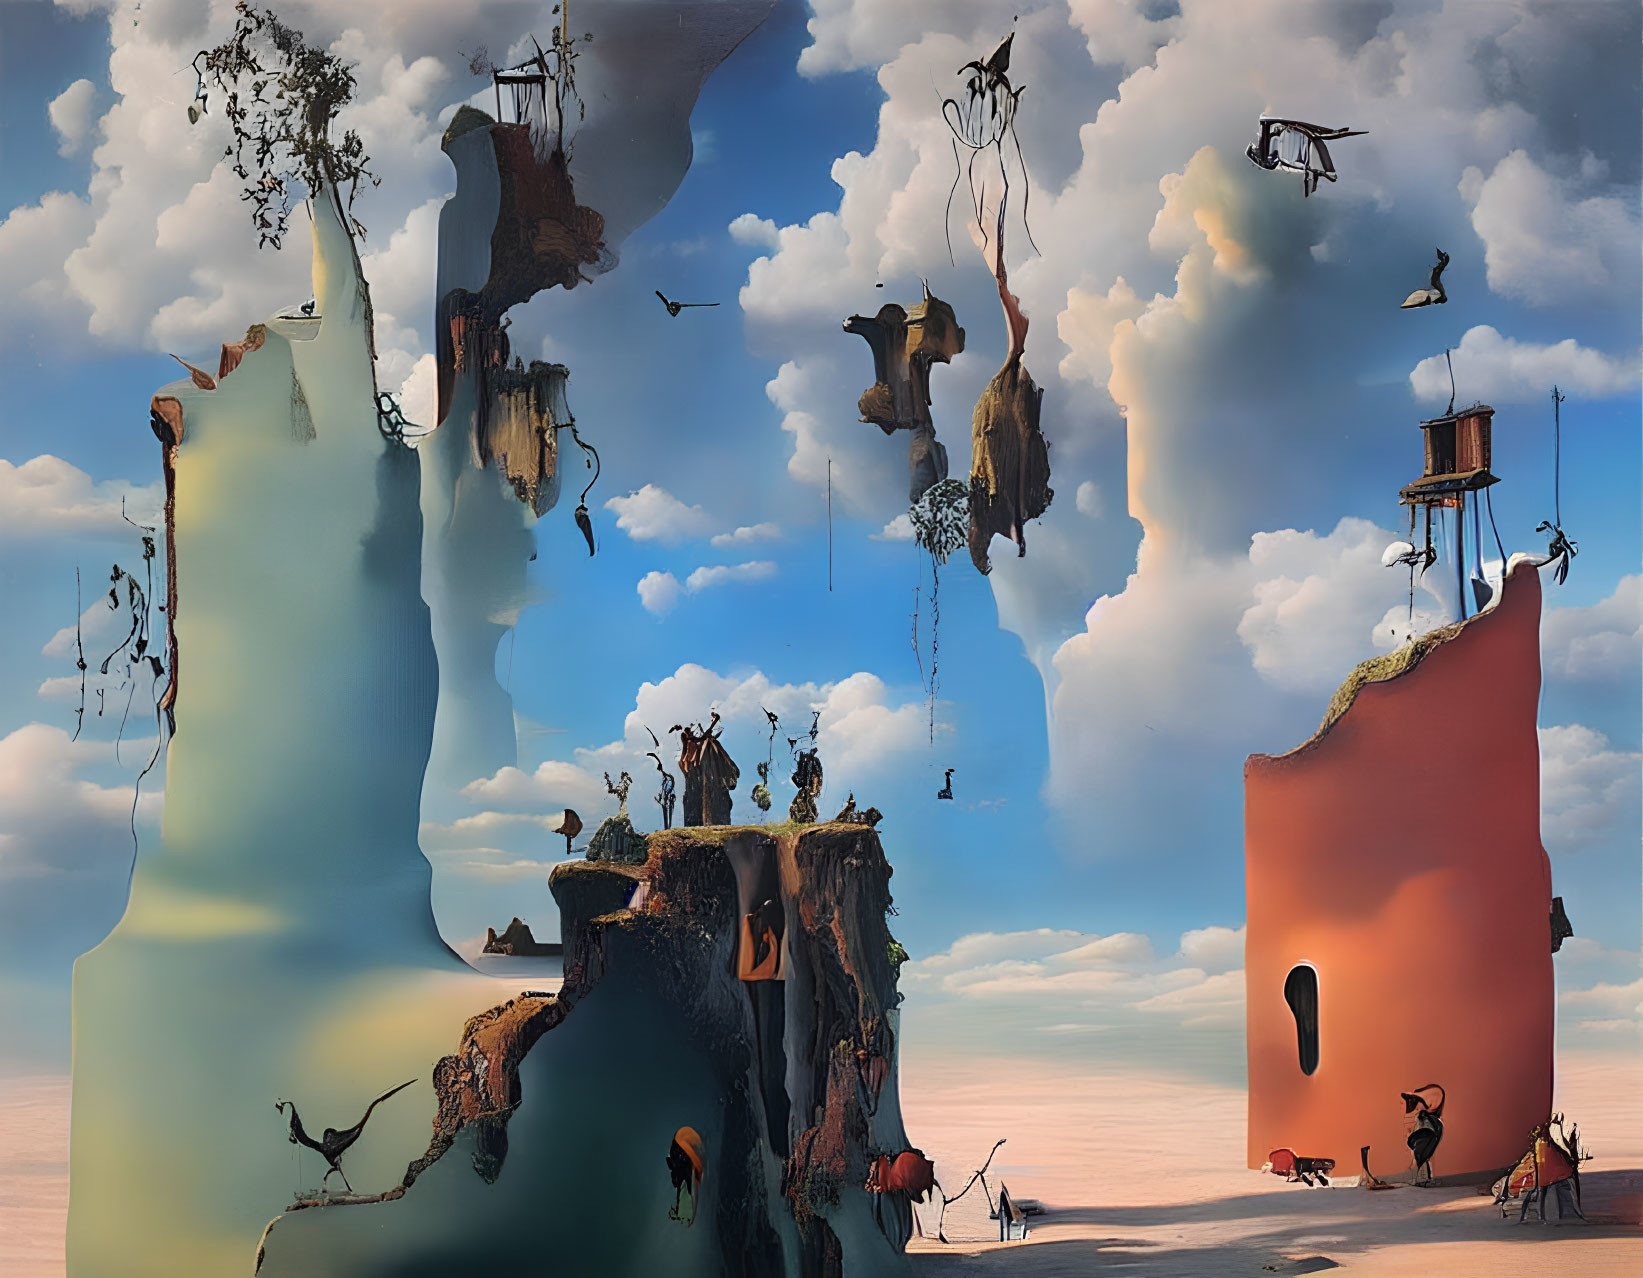 Surreal landscape: floating islands, whimsical structures, imaginary creatures, pastel-hued clouds